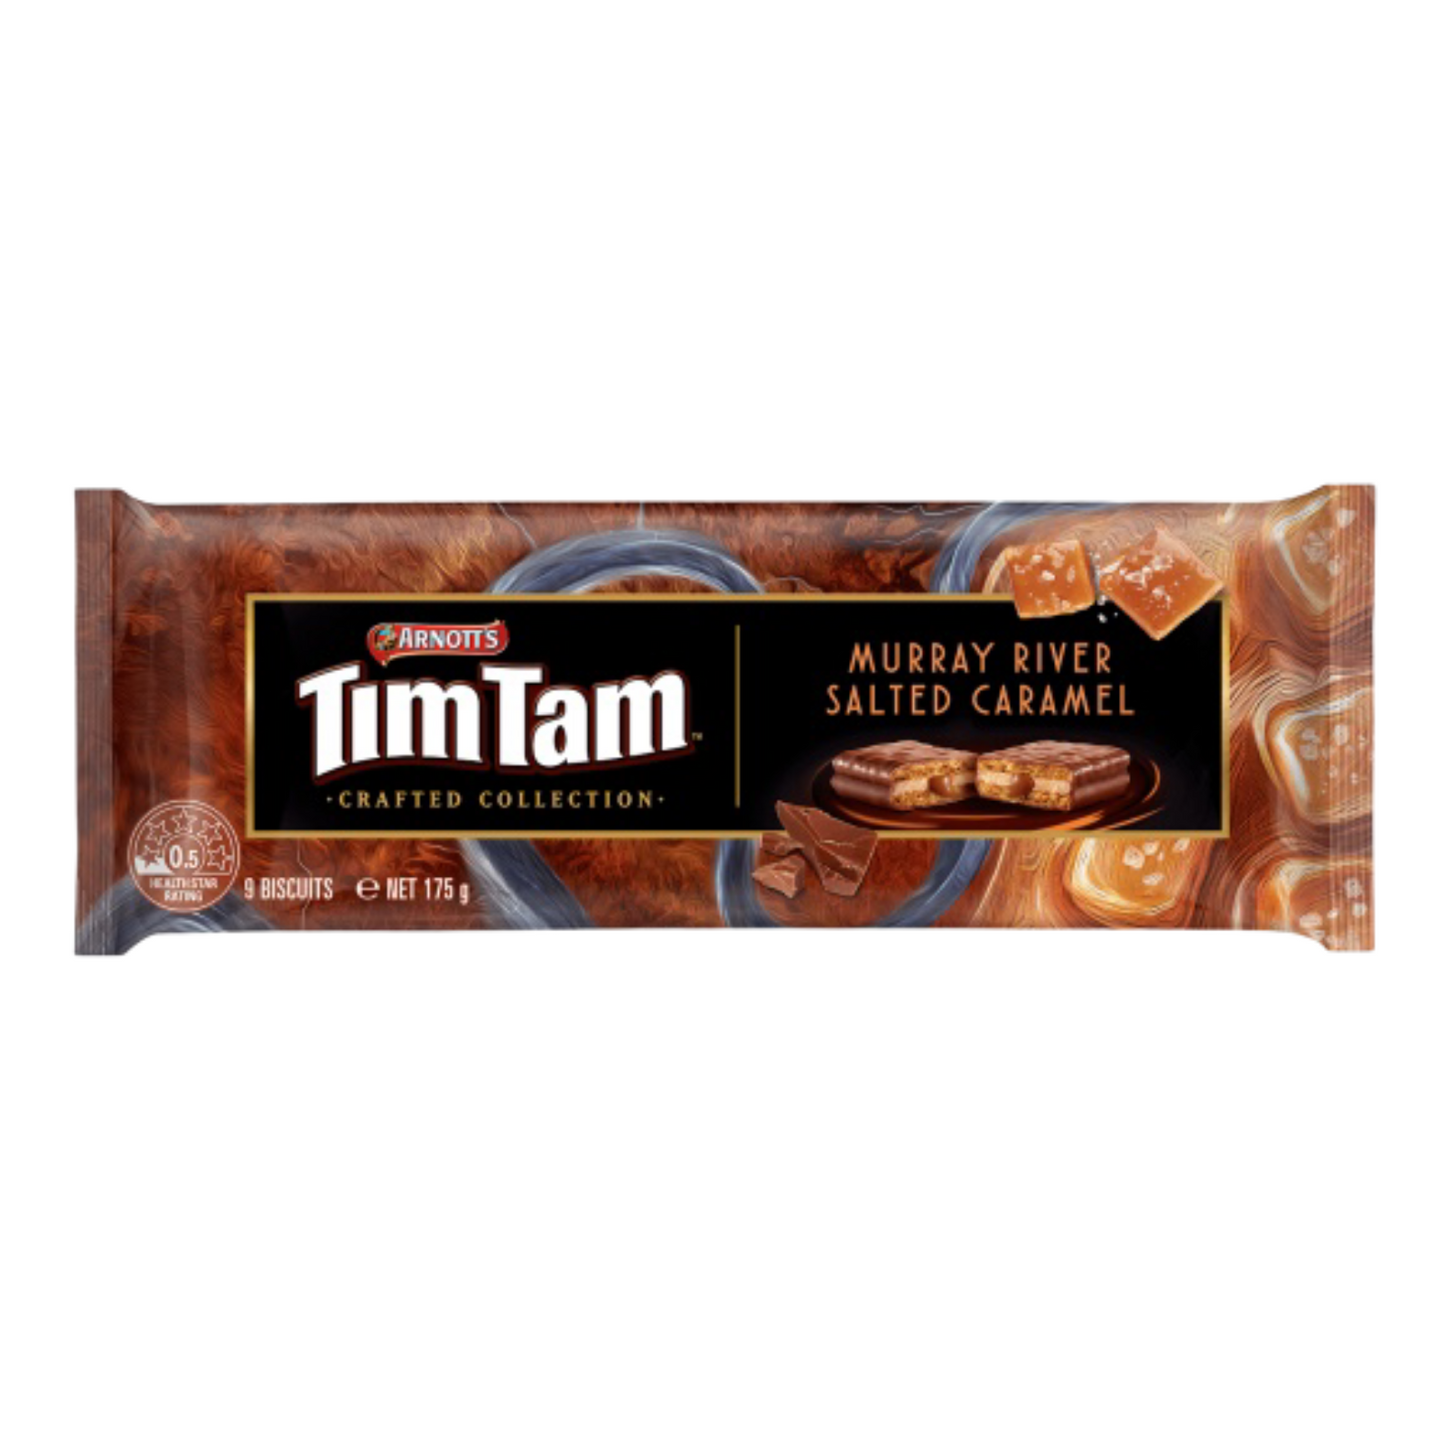 Arnotts Tim Tam Crafted Collection - Murray River Salted Caramel (175g)